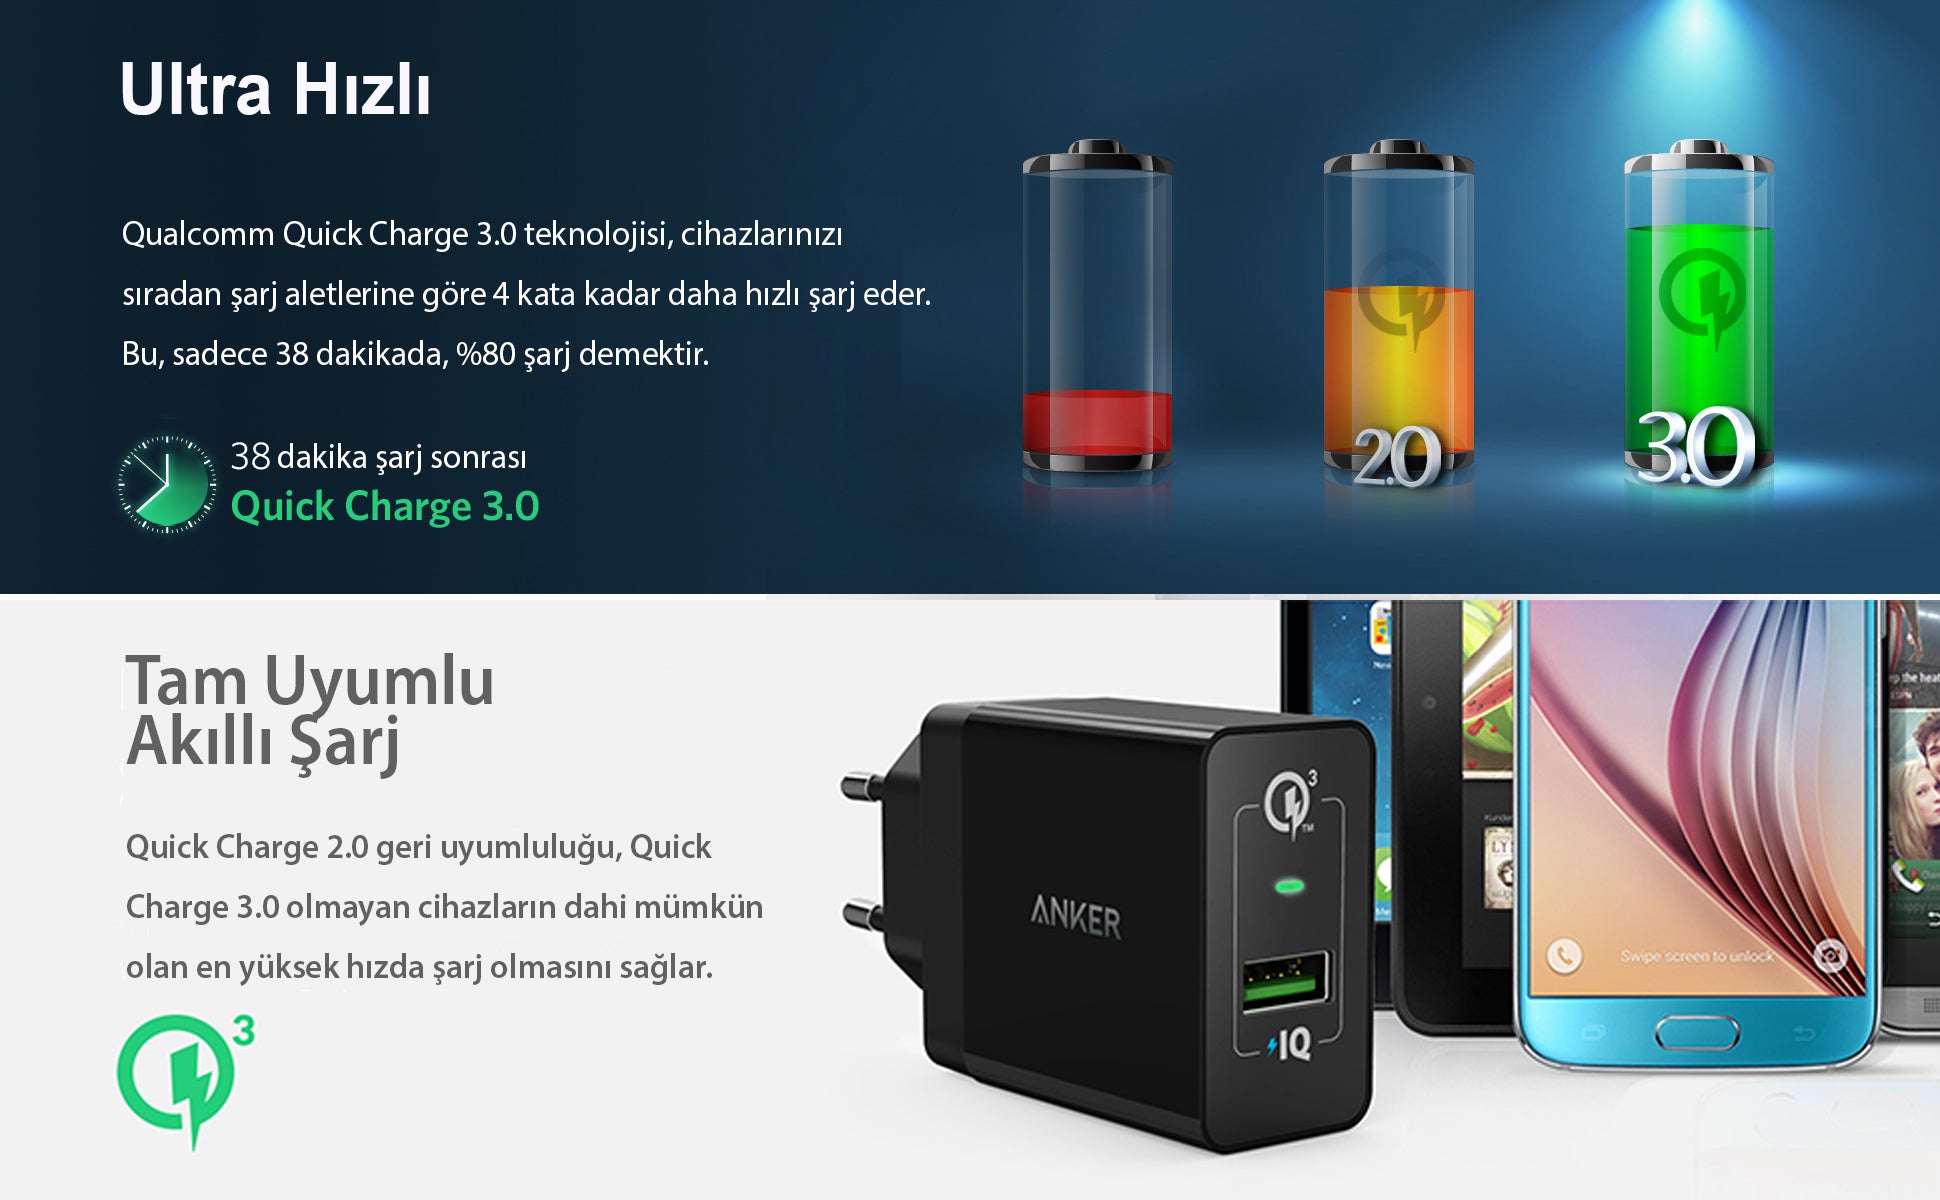 Quick charge. Qualcomm quick charge 3.0. Плата быстрой зарядки quick charge 3.0. СЗУ Anker POWERPORT 5 with Dual quick charge 3.0 eu Black offline Packaging v3.